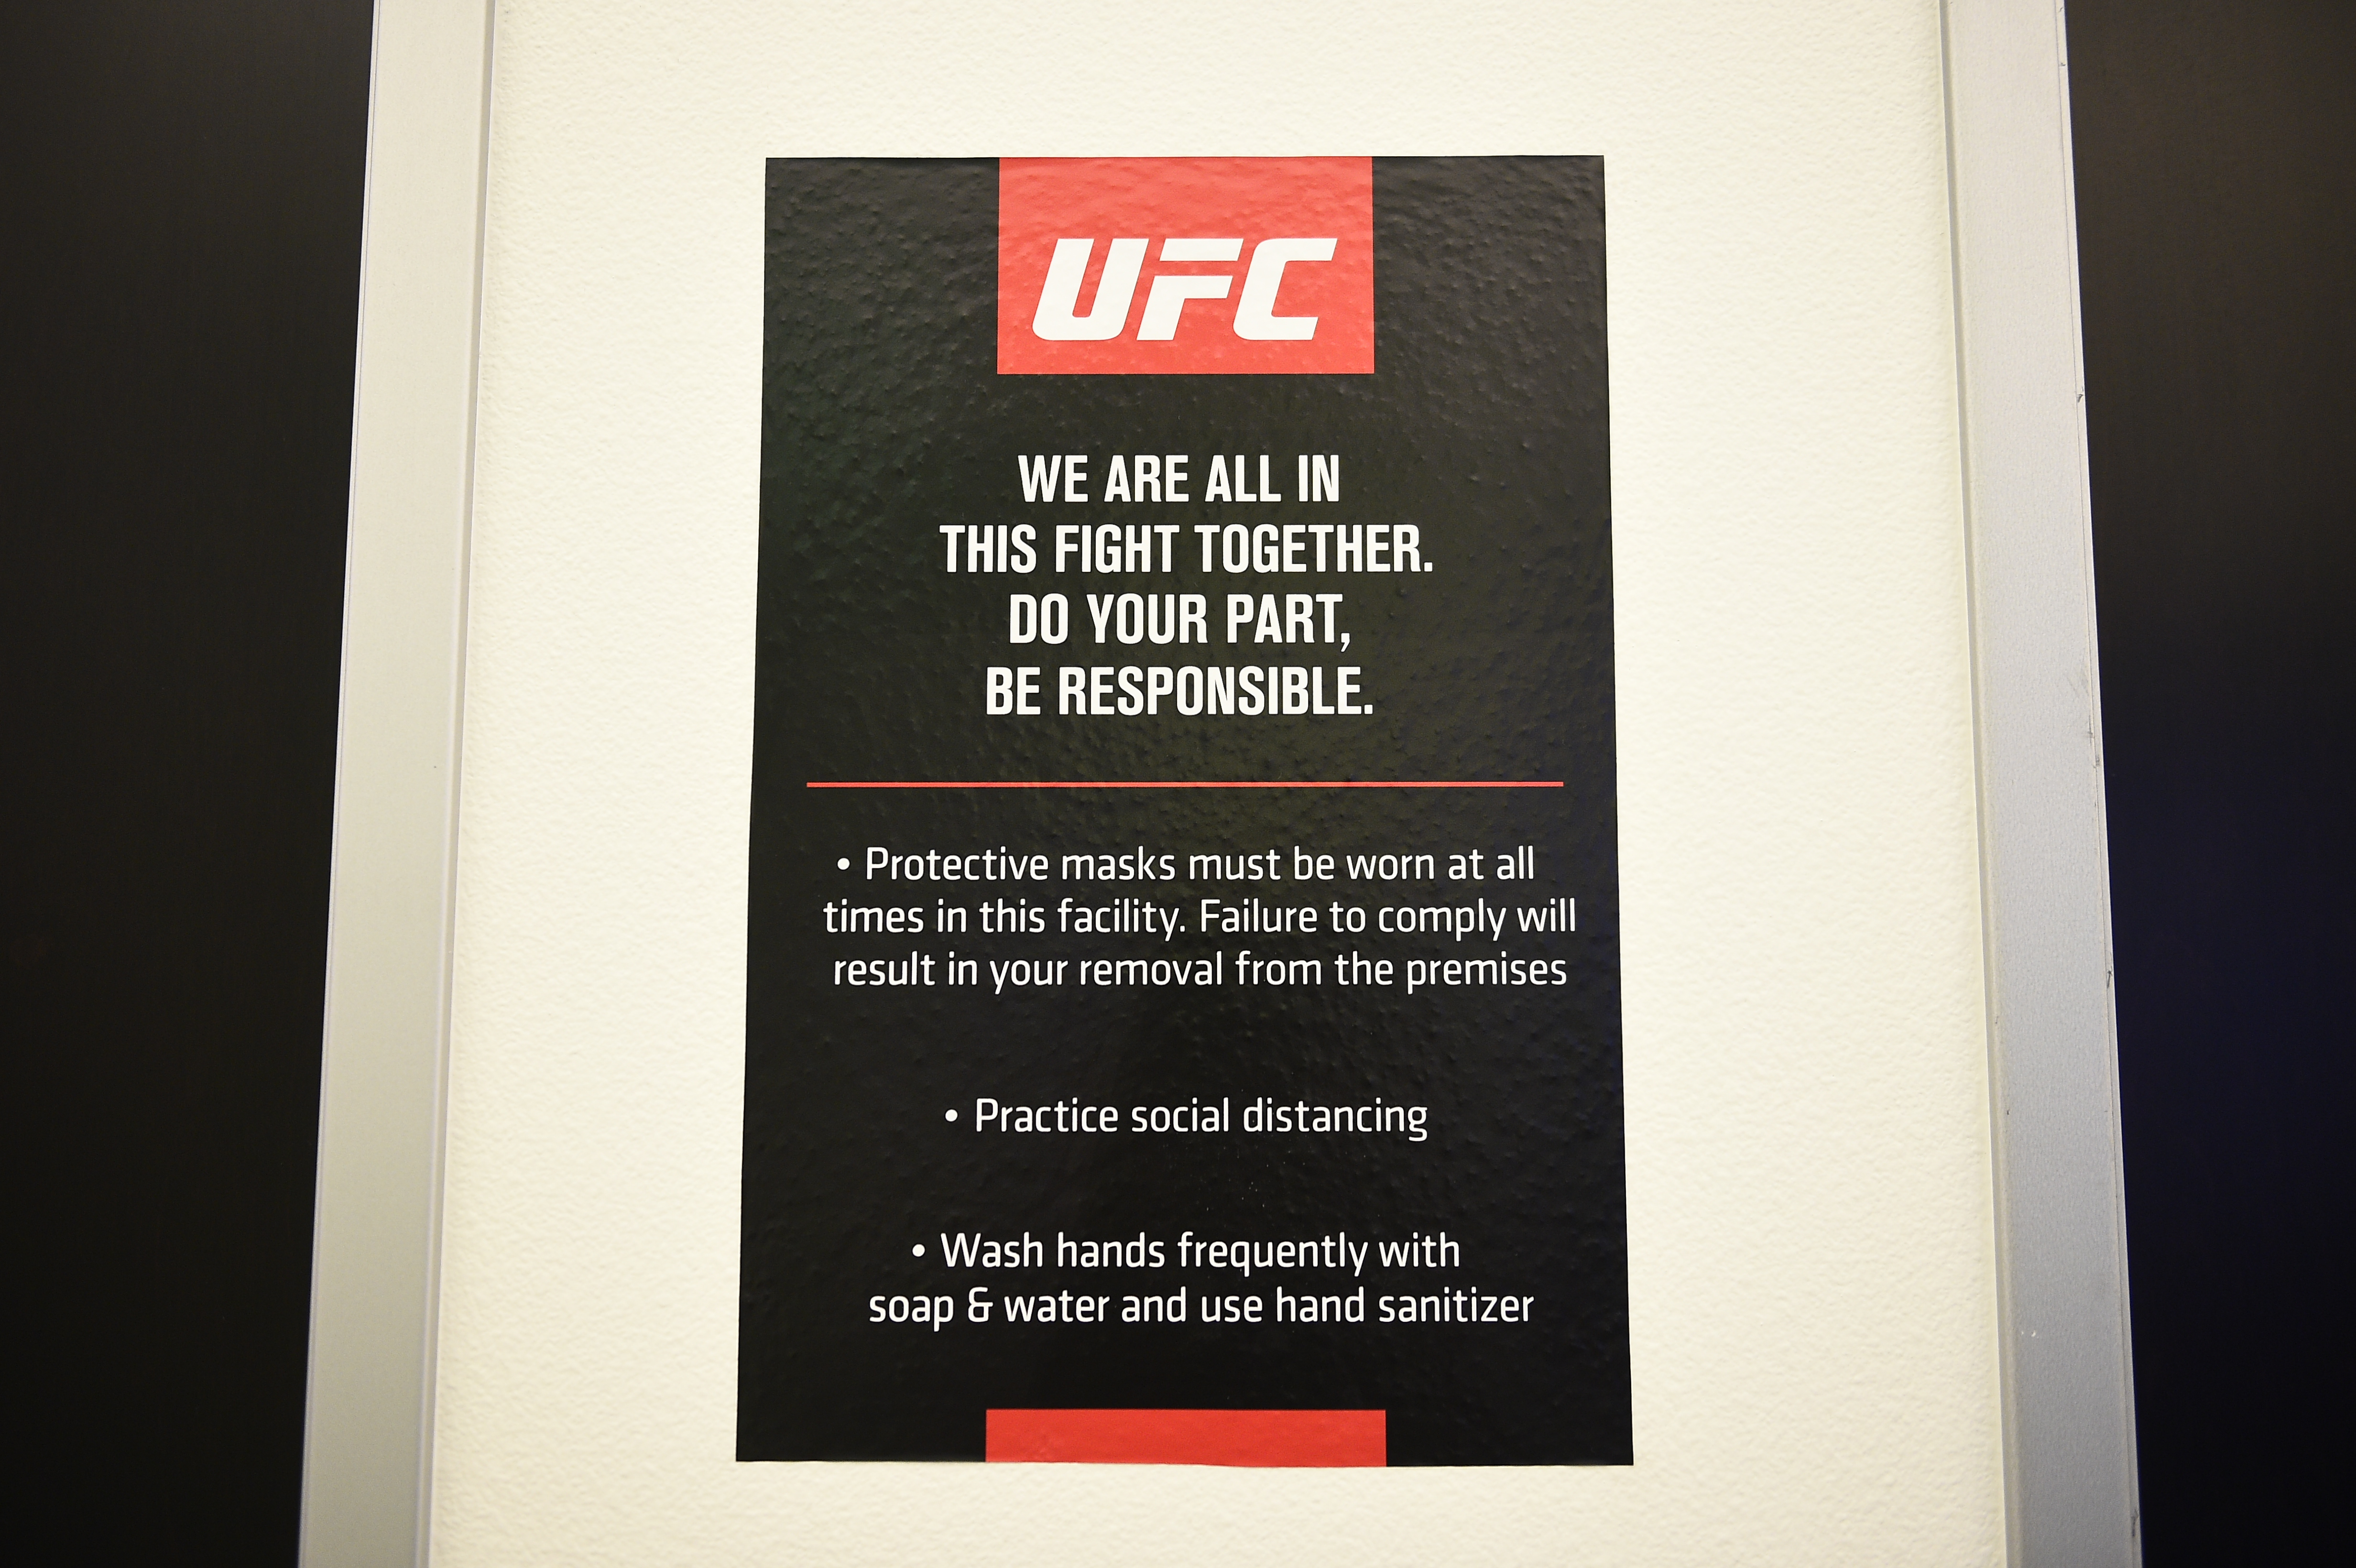 A sign encouraging safe practices to prevent COVID-19 spread is seen backstage during the UFC Fight Night event at UFC APEX on September 05, 2020 in Las Vegas, Nevada.